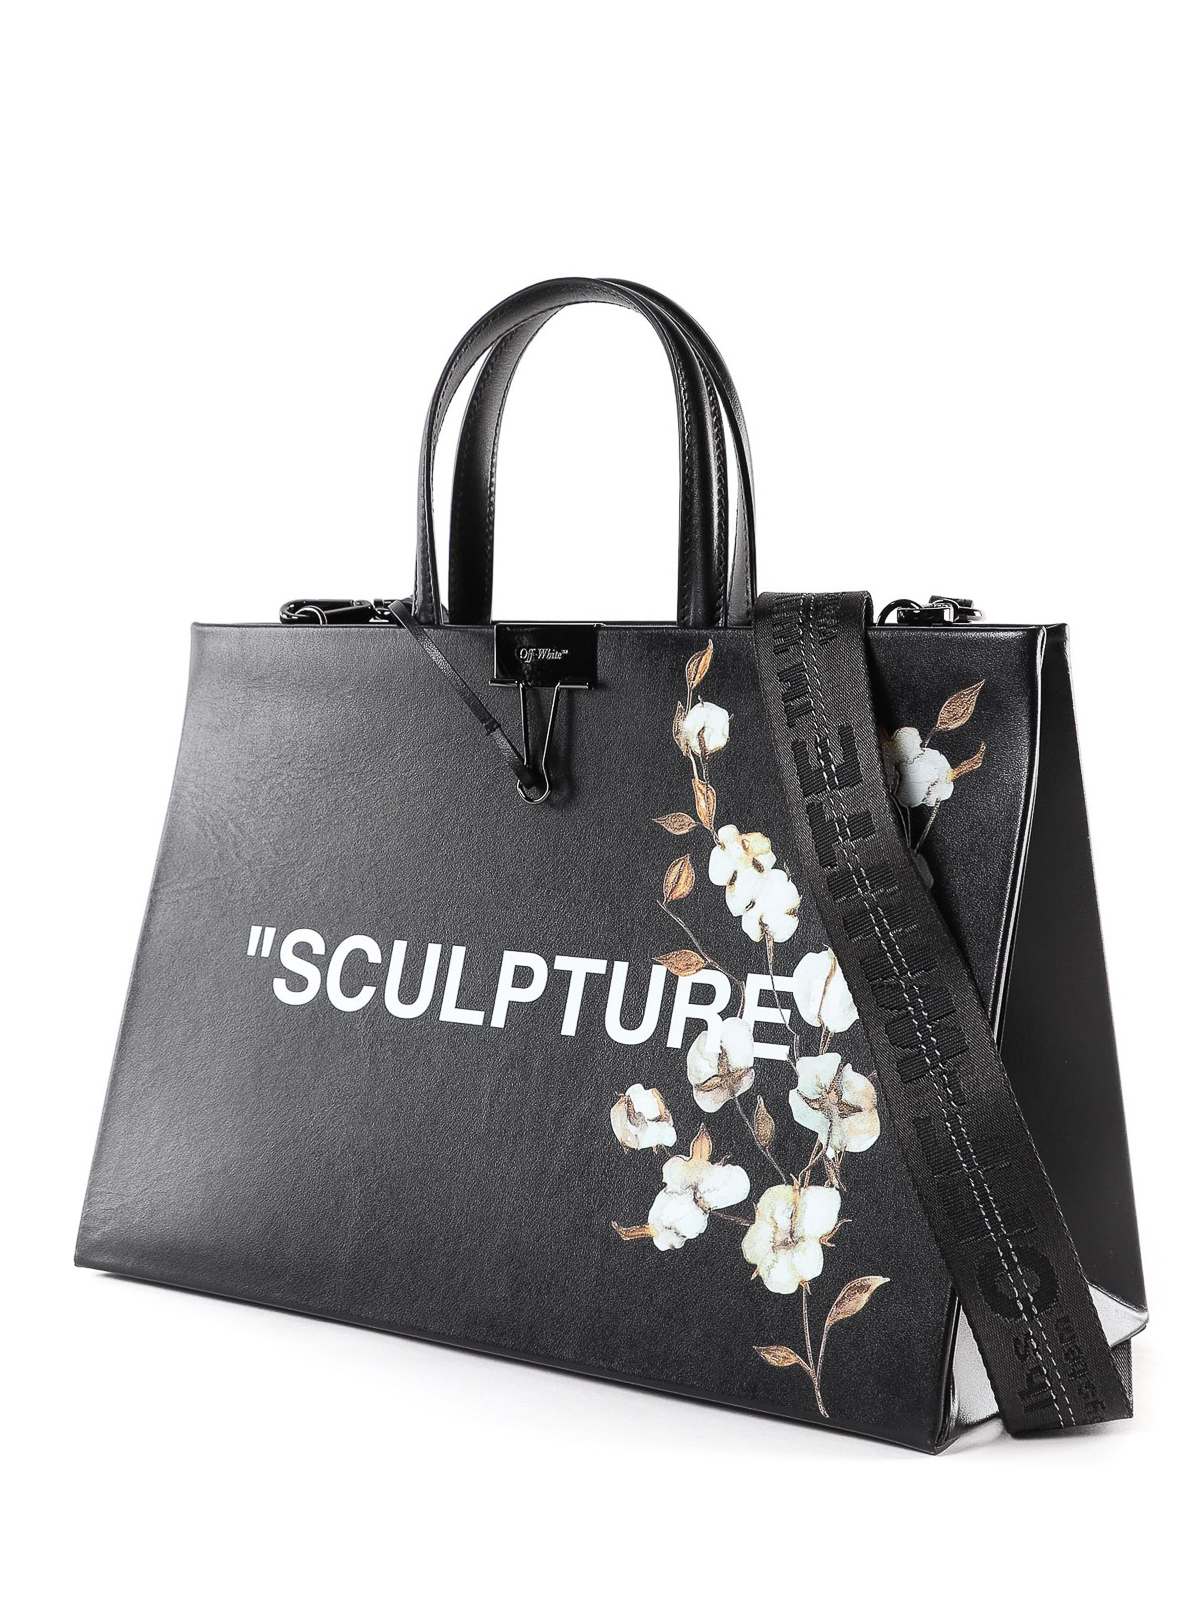 Off White Sculpture Leather Tote Bag